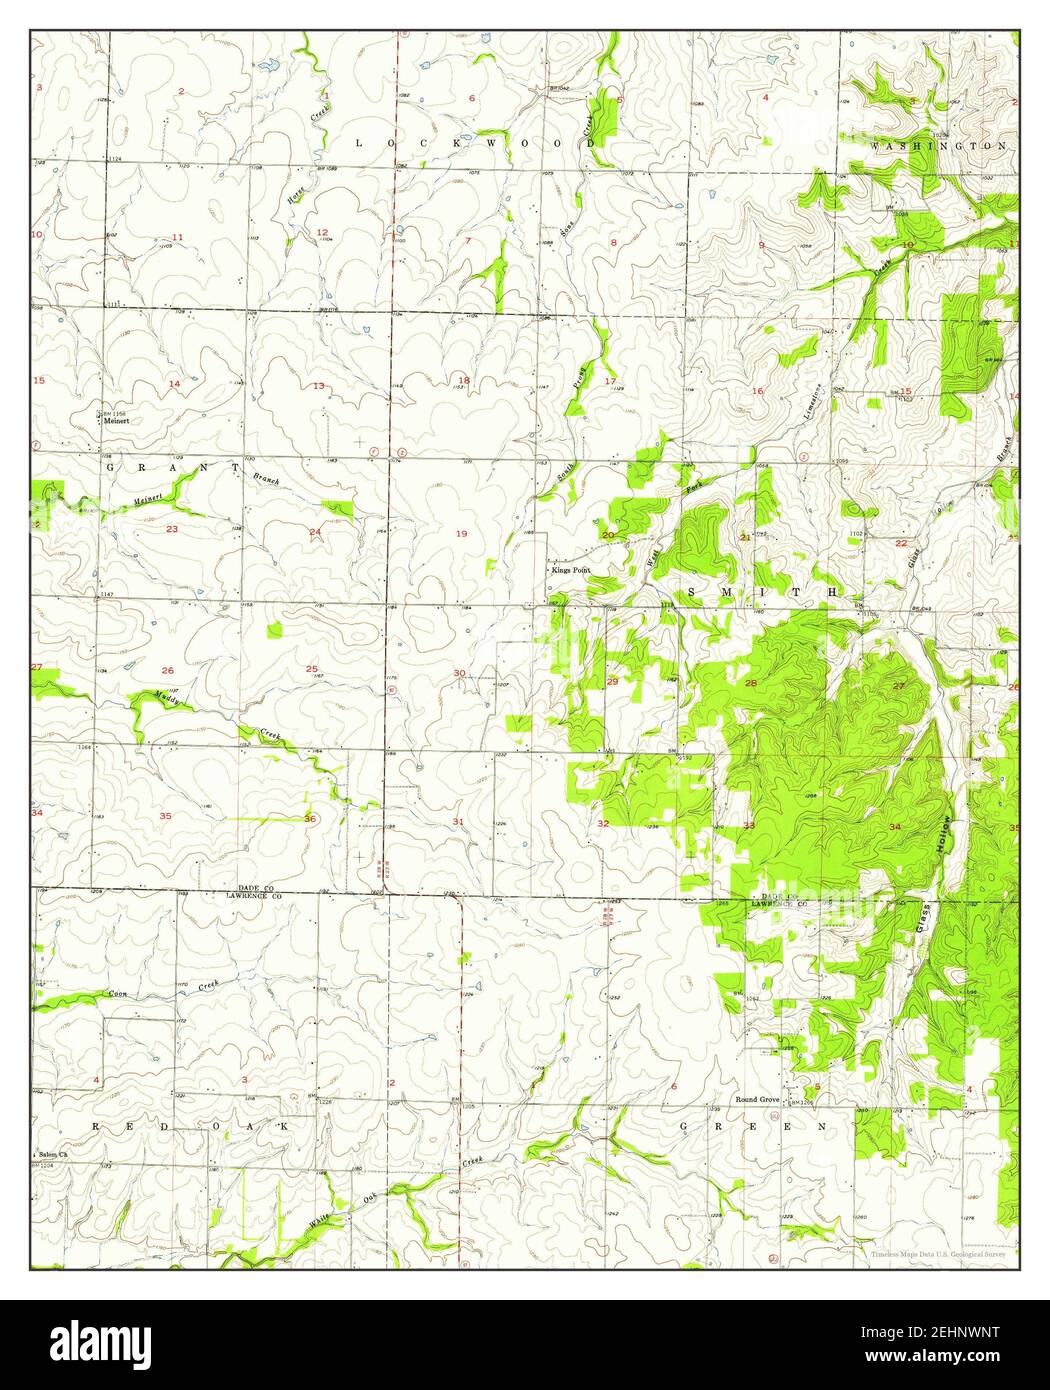 Kings Point, Missouri, map 1956, 1:24000, United States of America by Timeless Maps, data U.S. Geological Survey Stock Photo